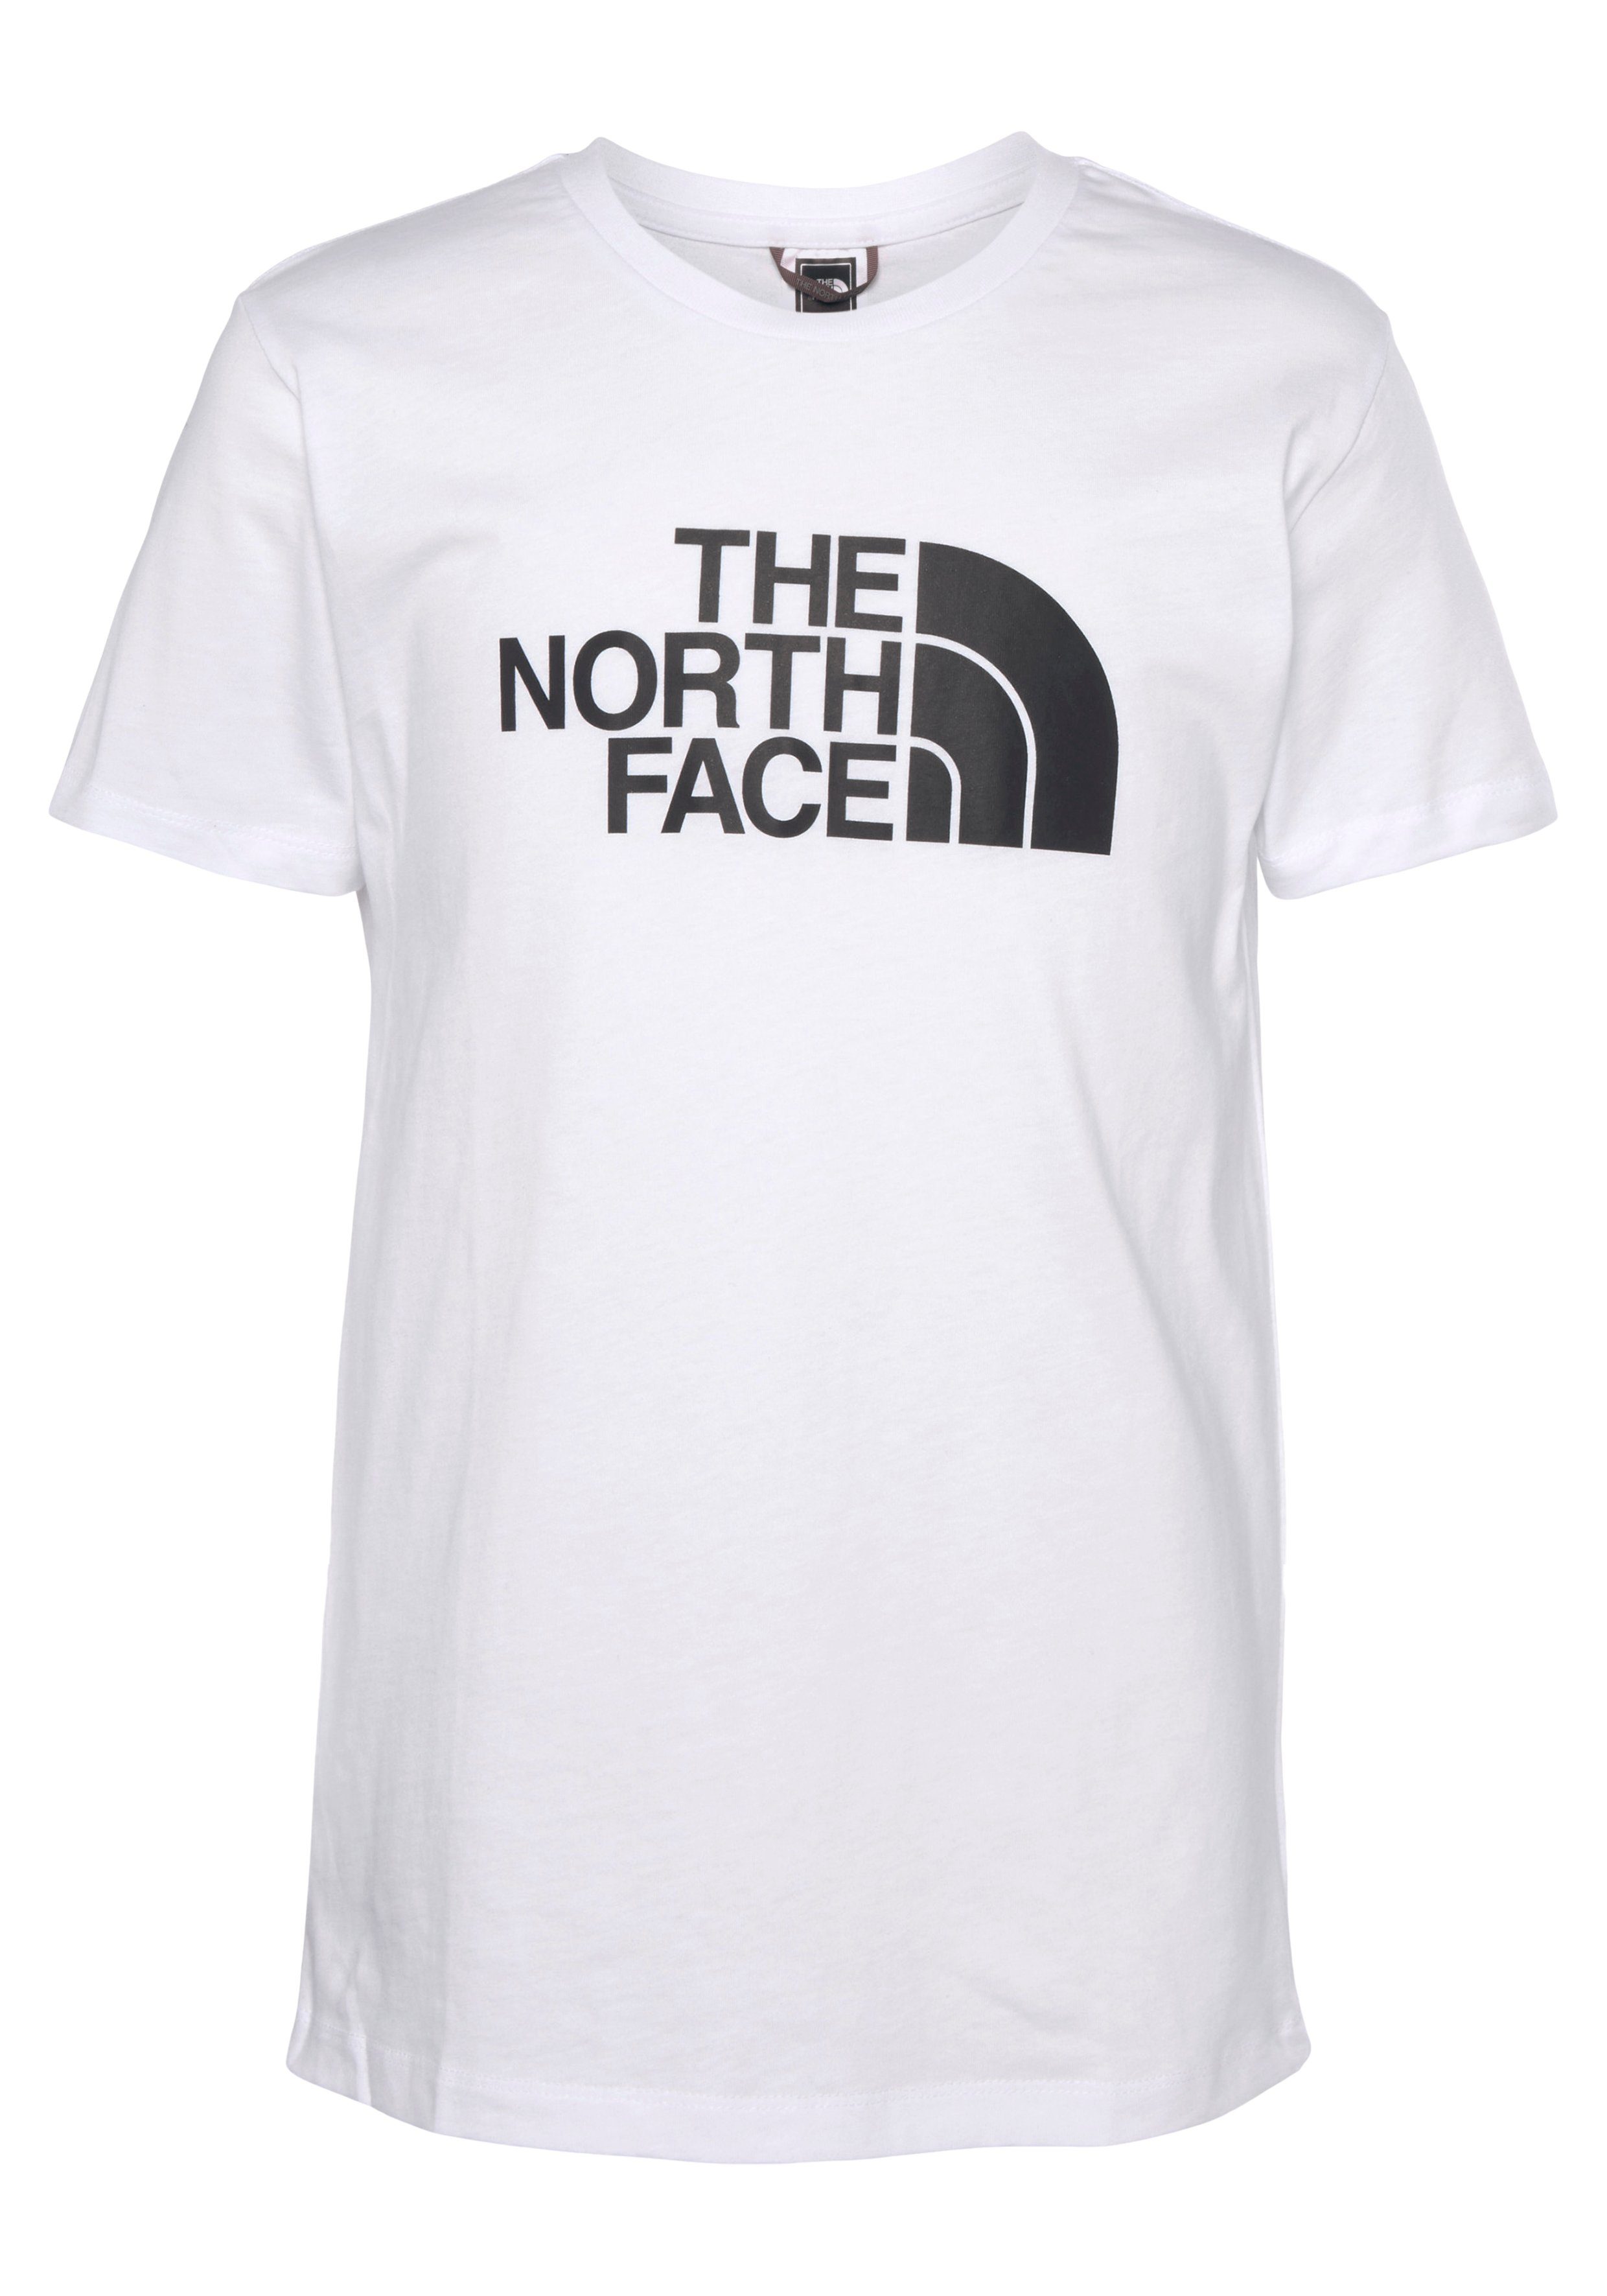 Kinder TEE EASY Face - North white The für T-Shirt